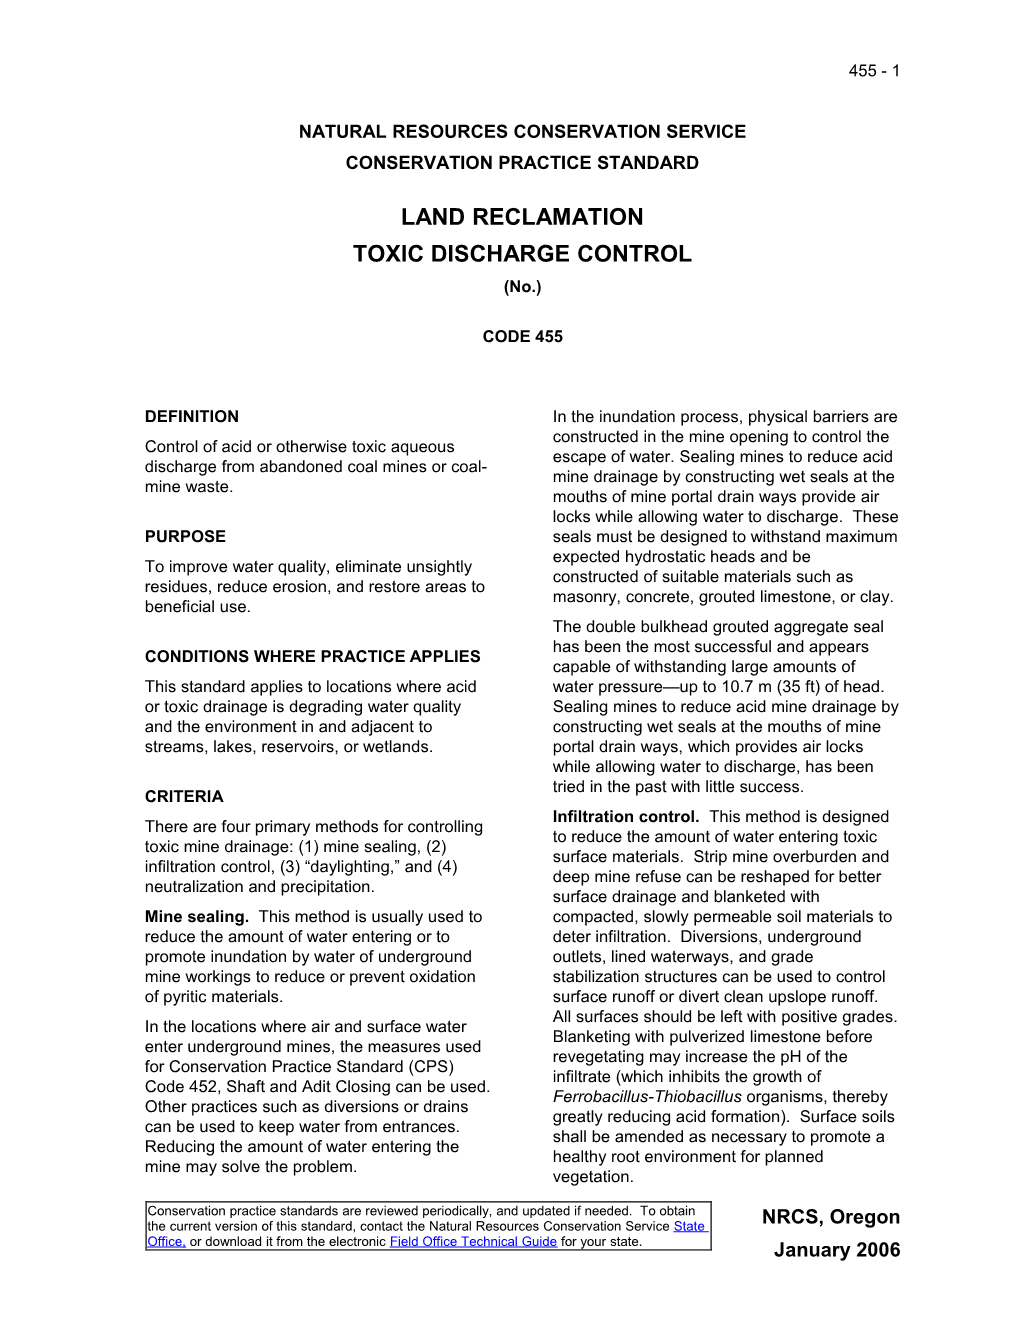 Land Reclamation, Toxic Discharge Control 455